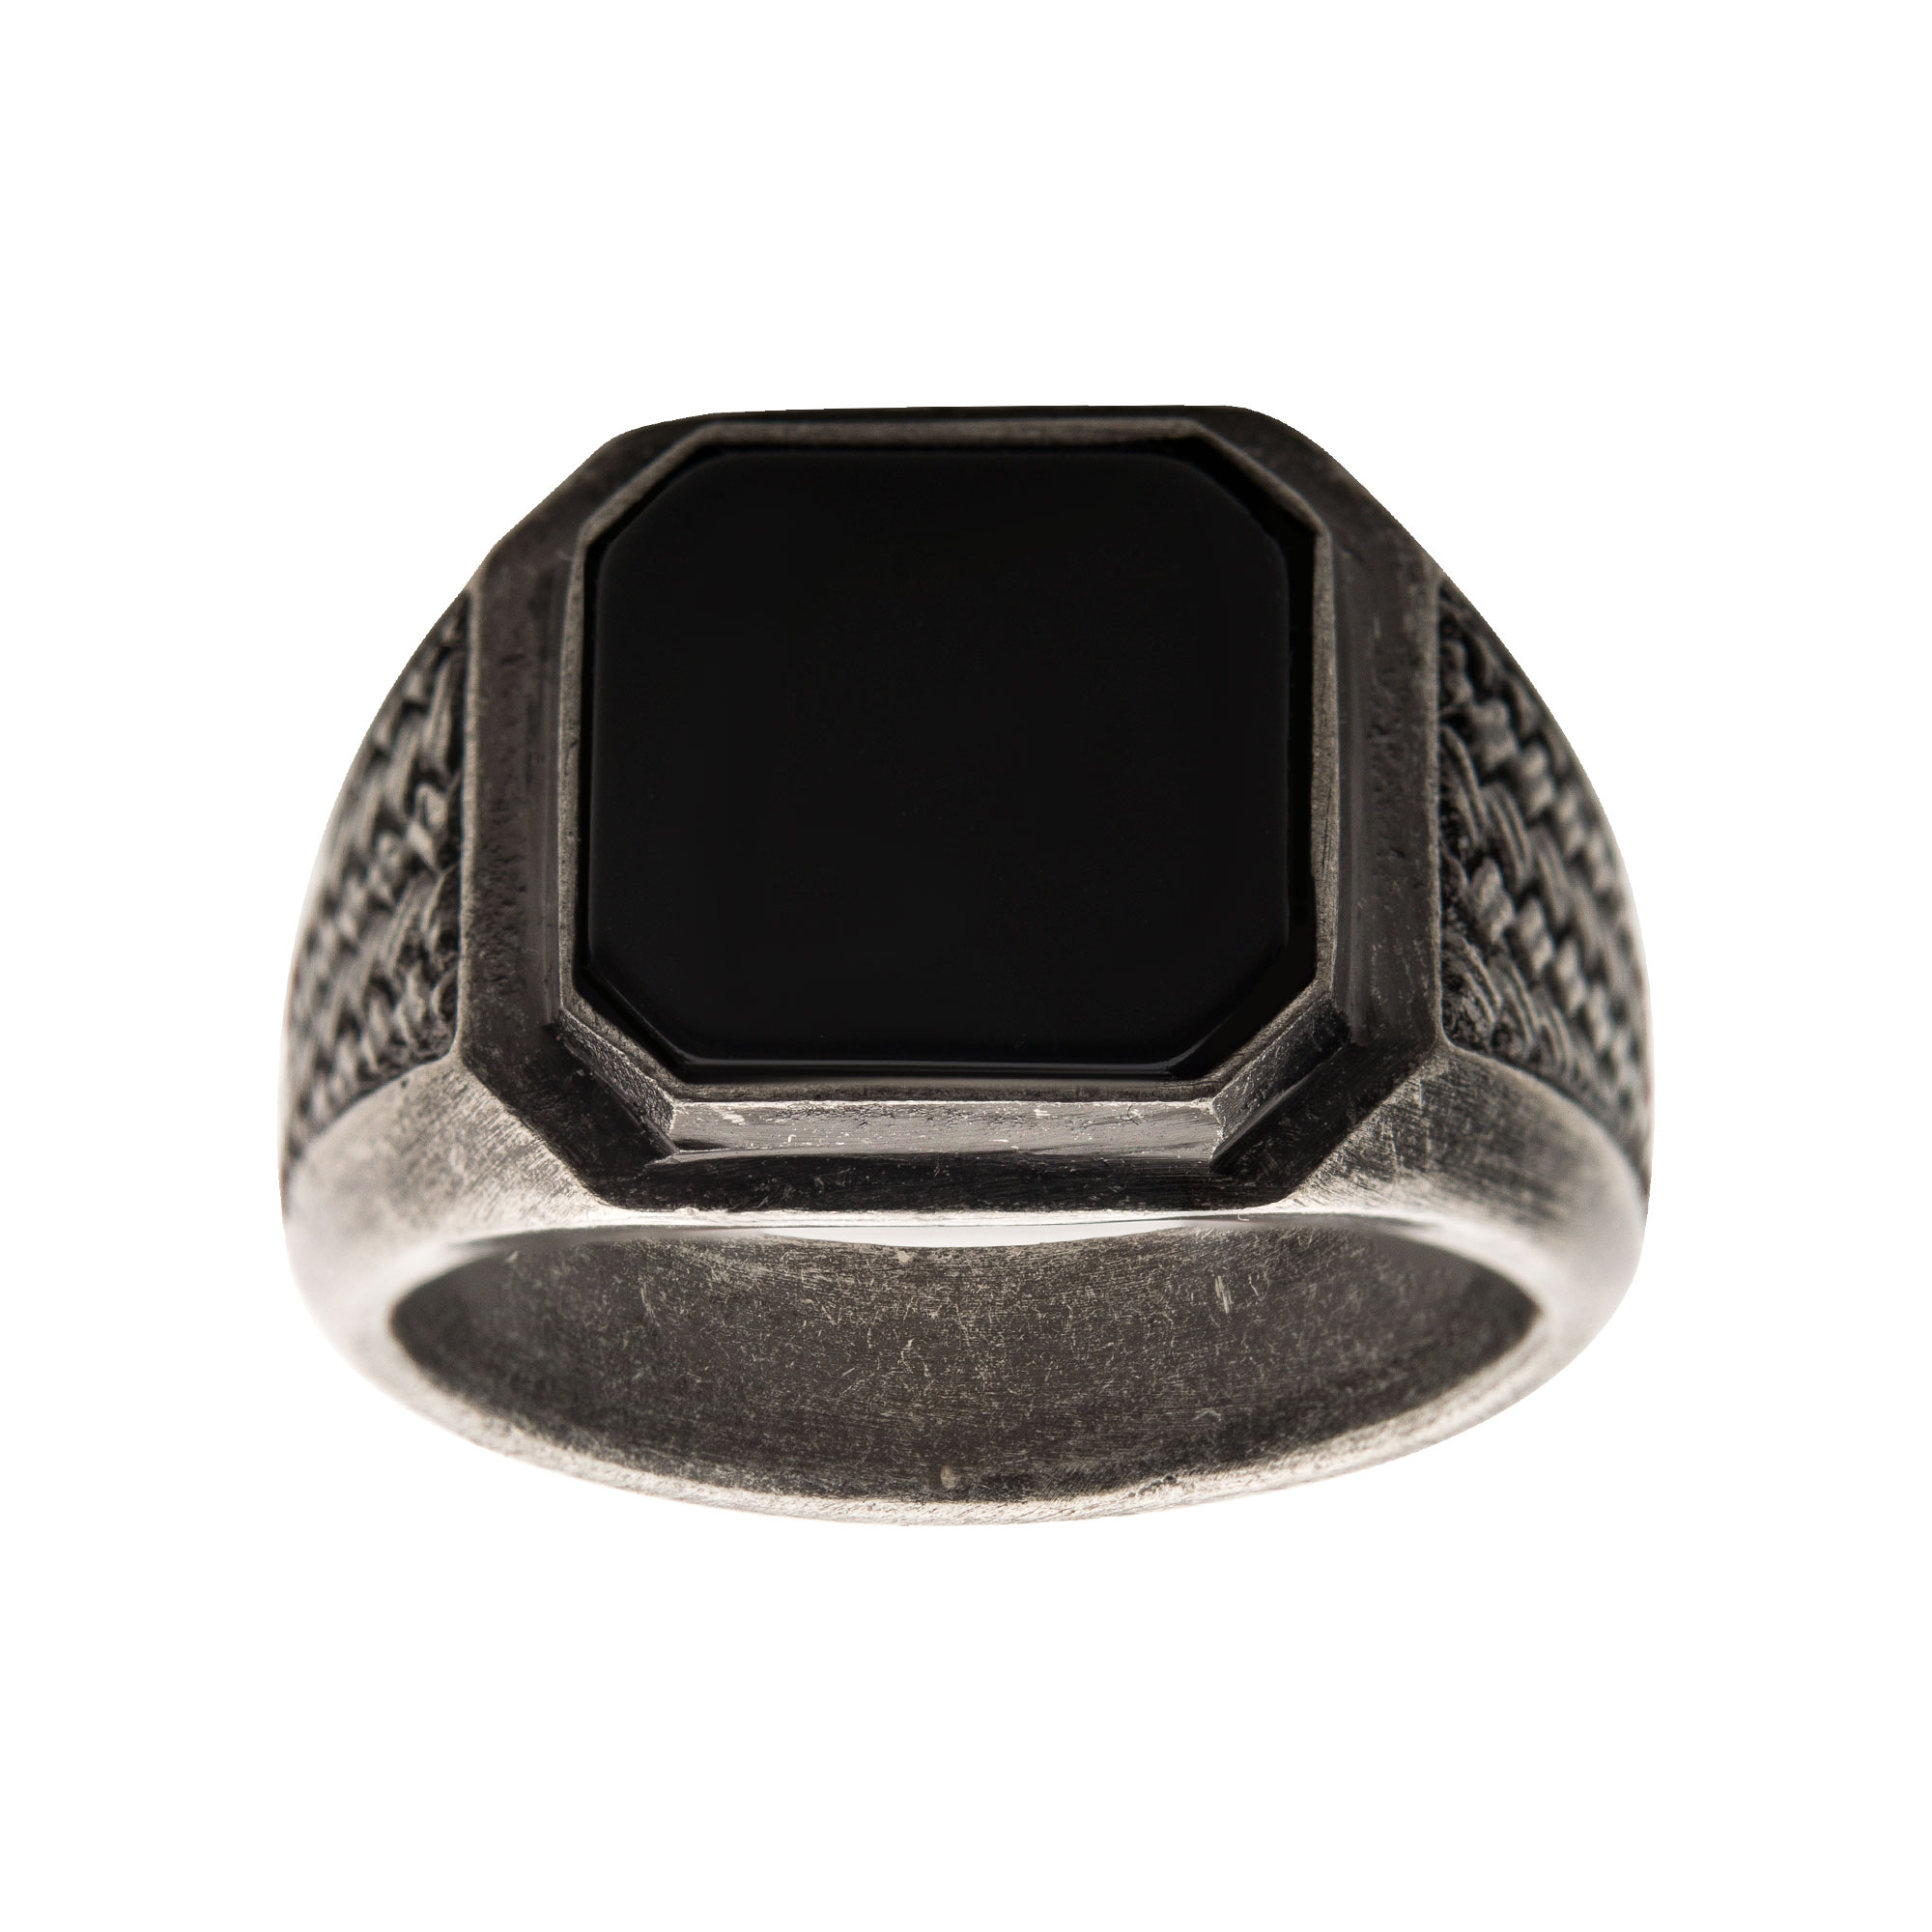 Stainless Steel Silver Plated with Black Agate Stone Ring Image 2 P.K. Bennett Jewelers Mundelein, IL